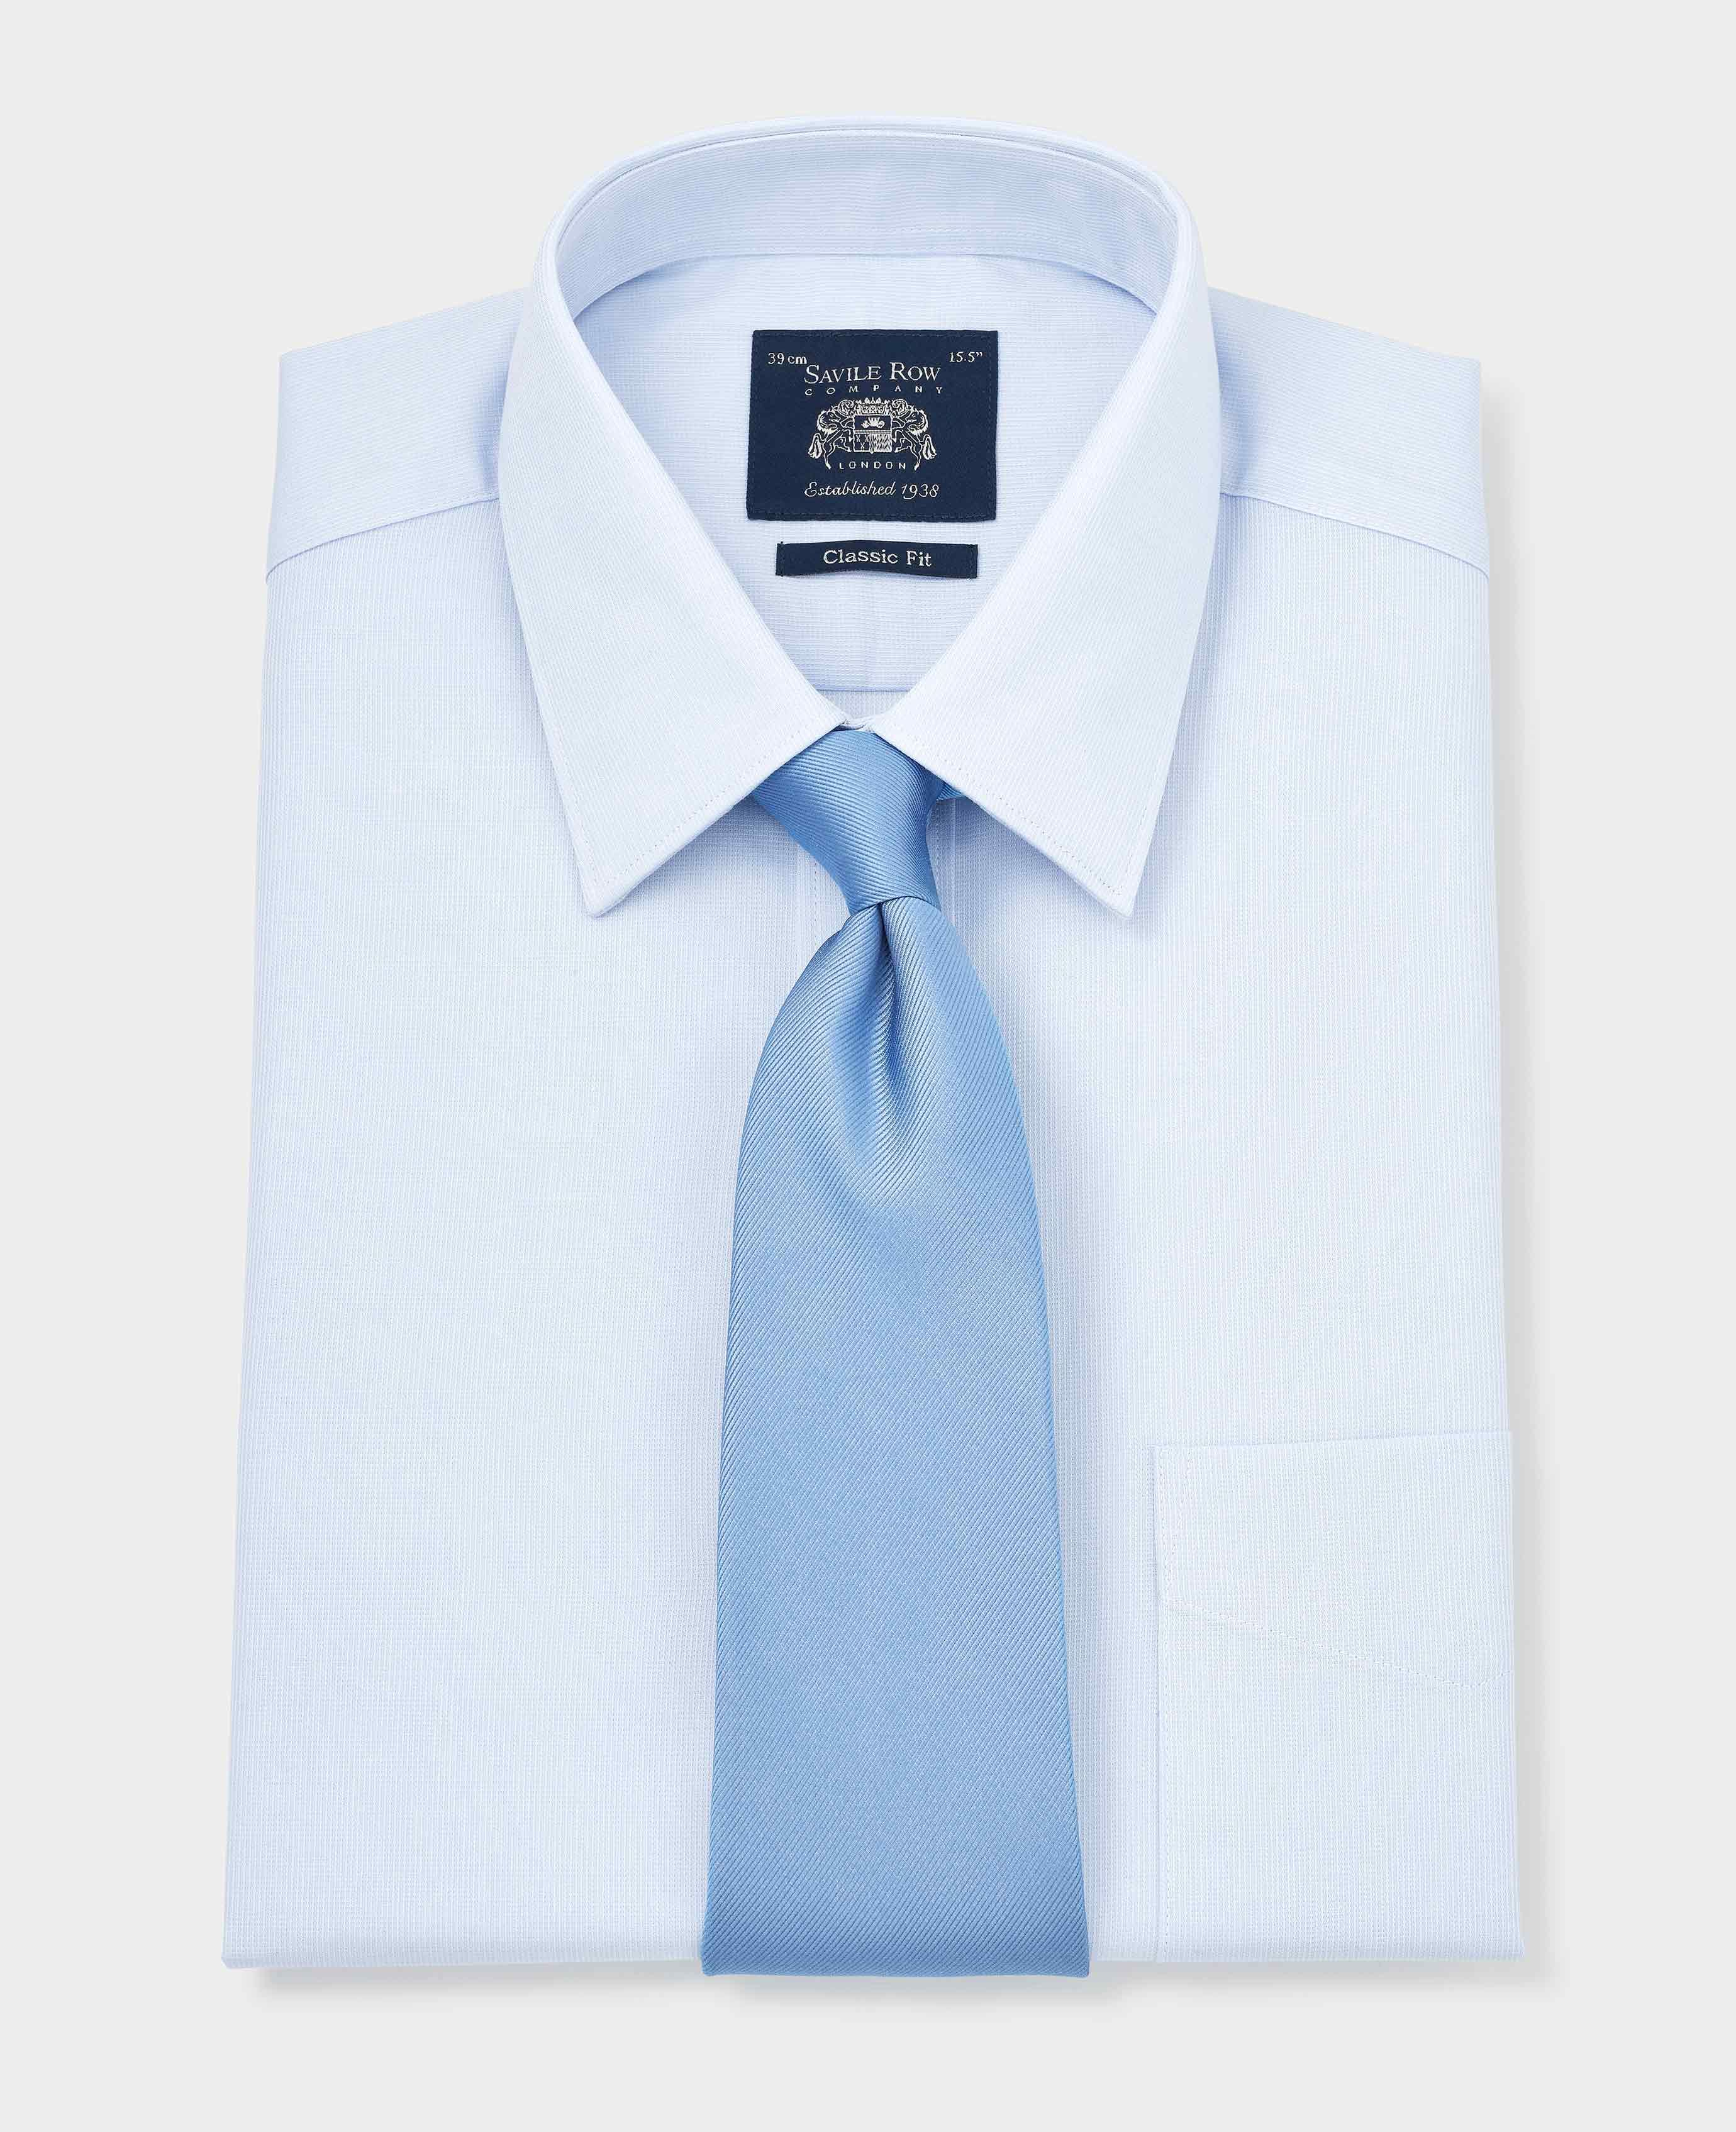 Men’s Classic Fit Formal Shirt in Sky Blue | Savile Row Co